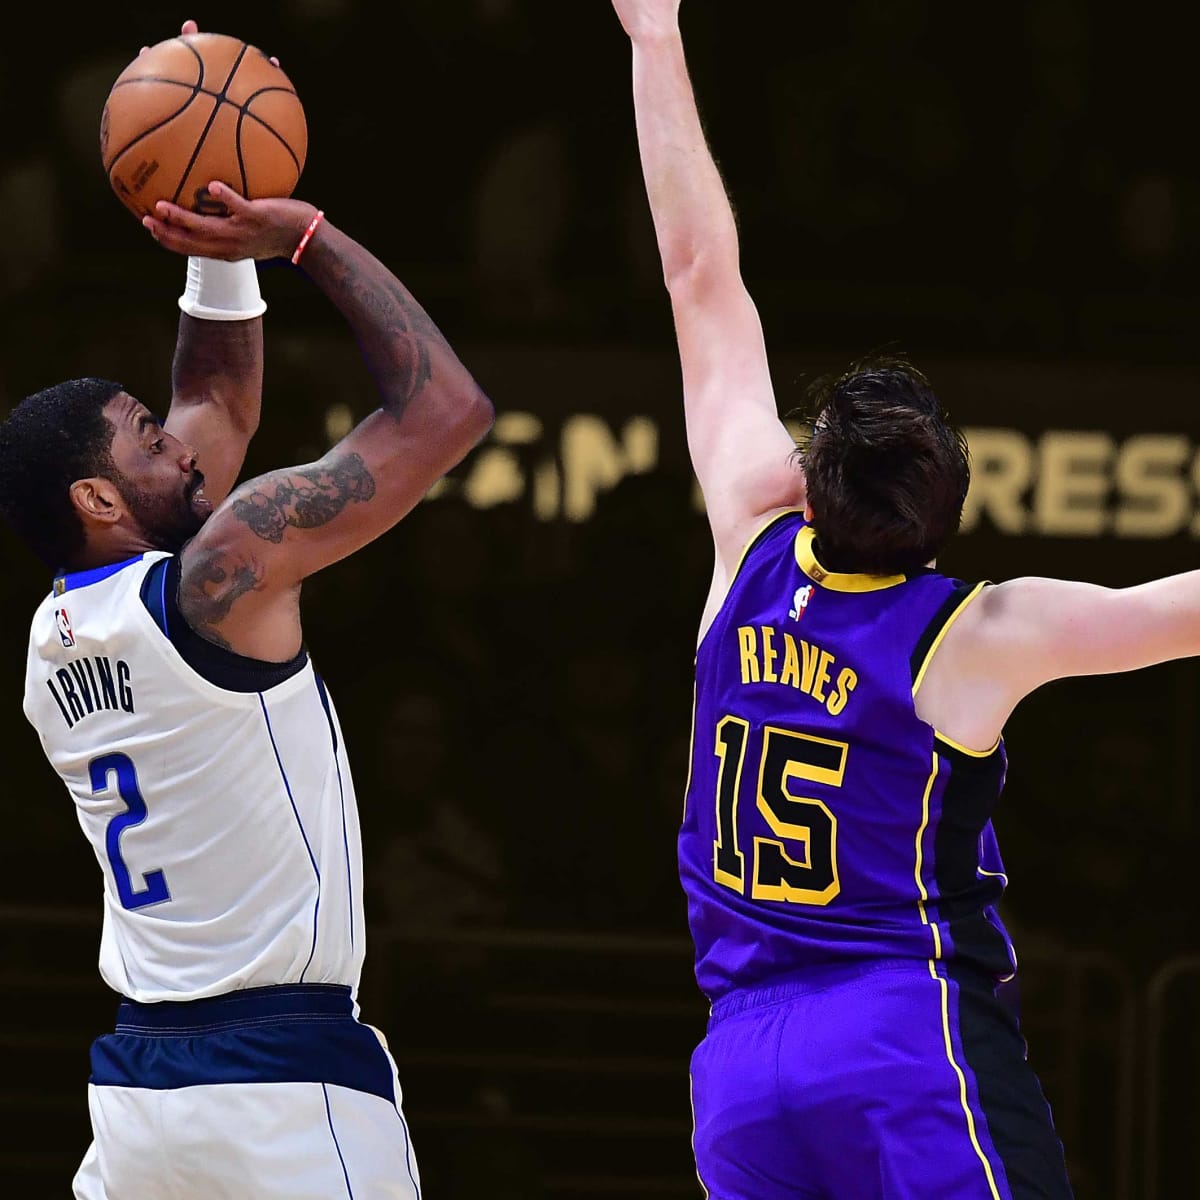 Lakers retain guards Austin Reaves and D'Angelo Russell on new